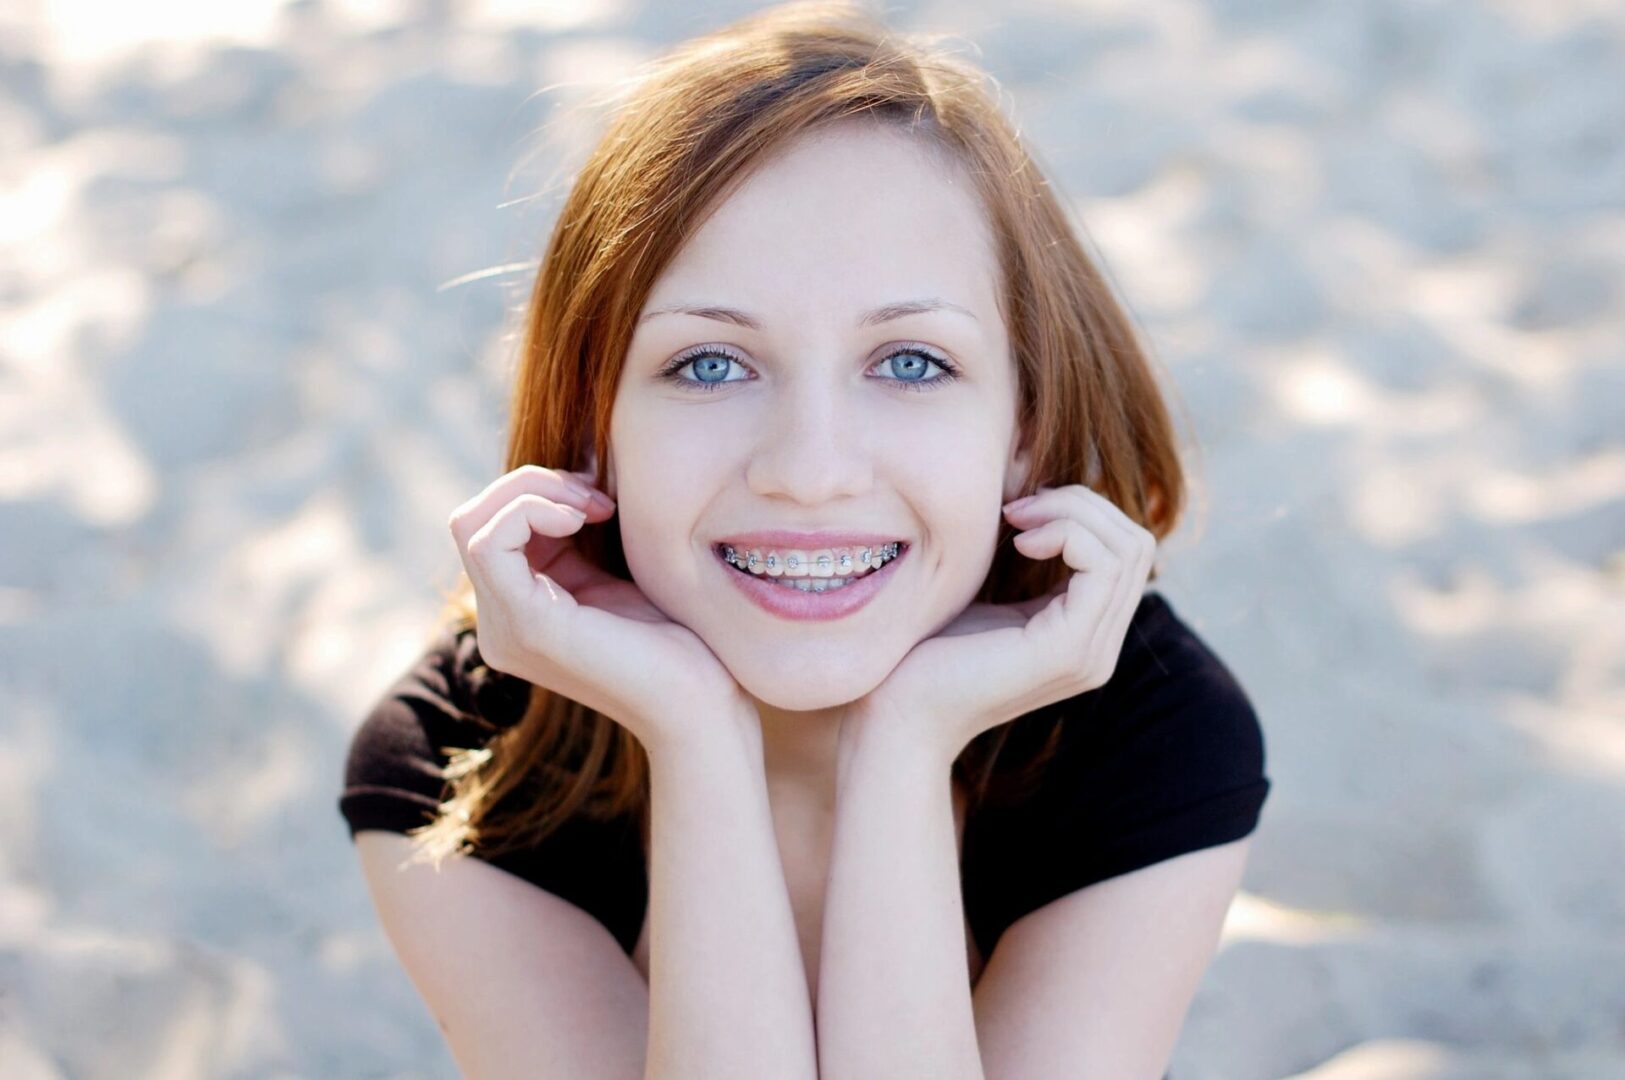 A woman with red hair and blue eyes smiling.